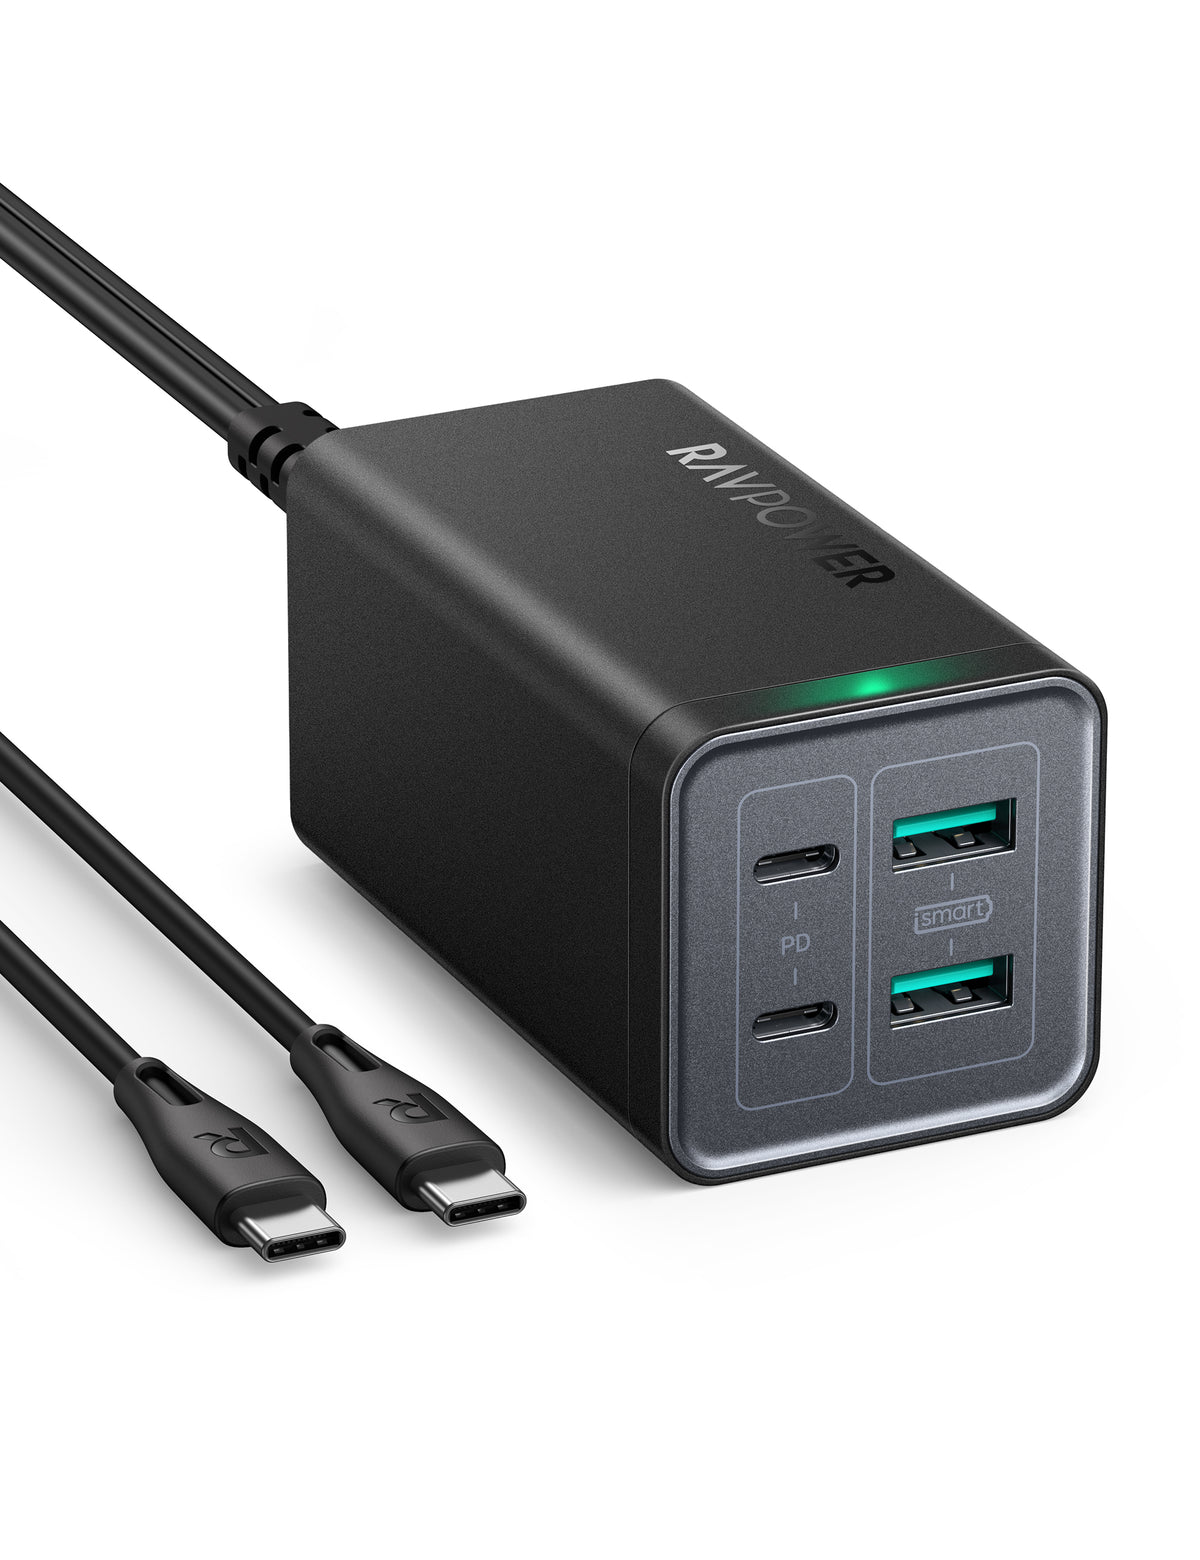 Charger - PD Pioneer wireless and wired charger |RAVPower